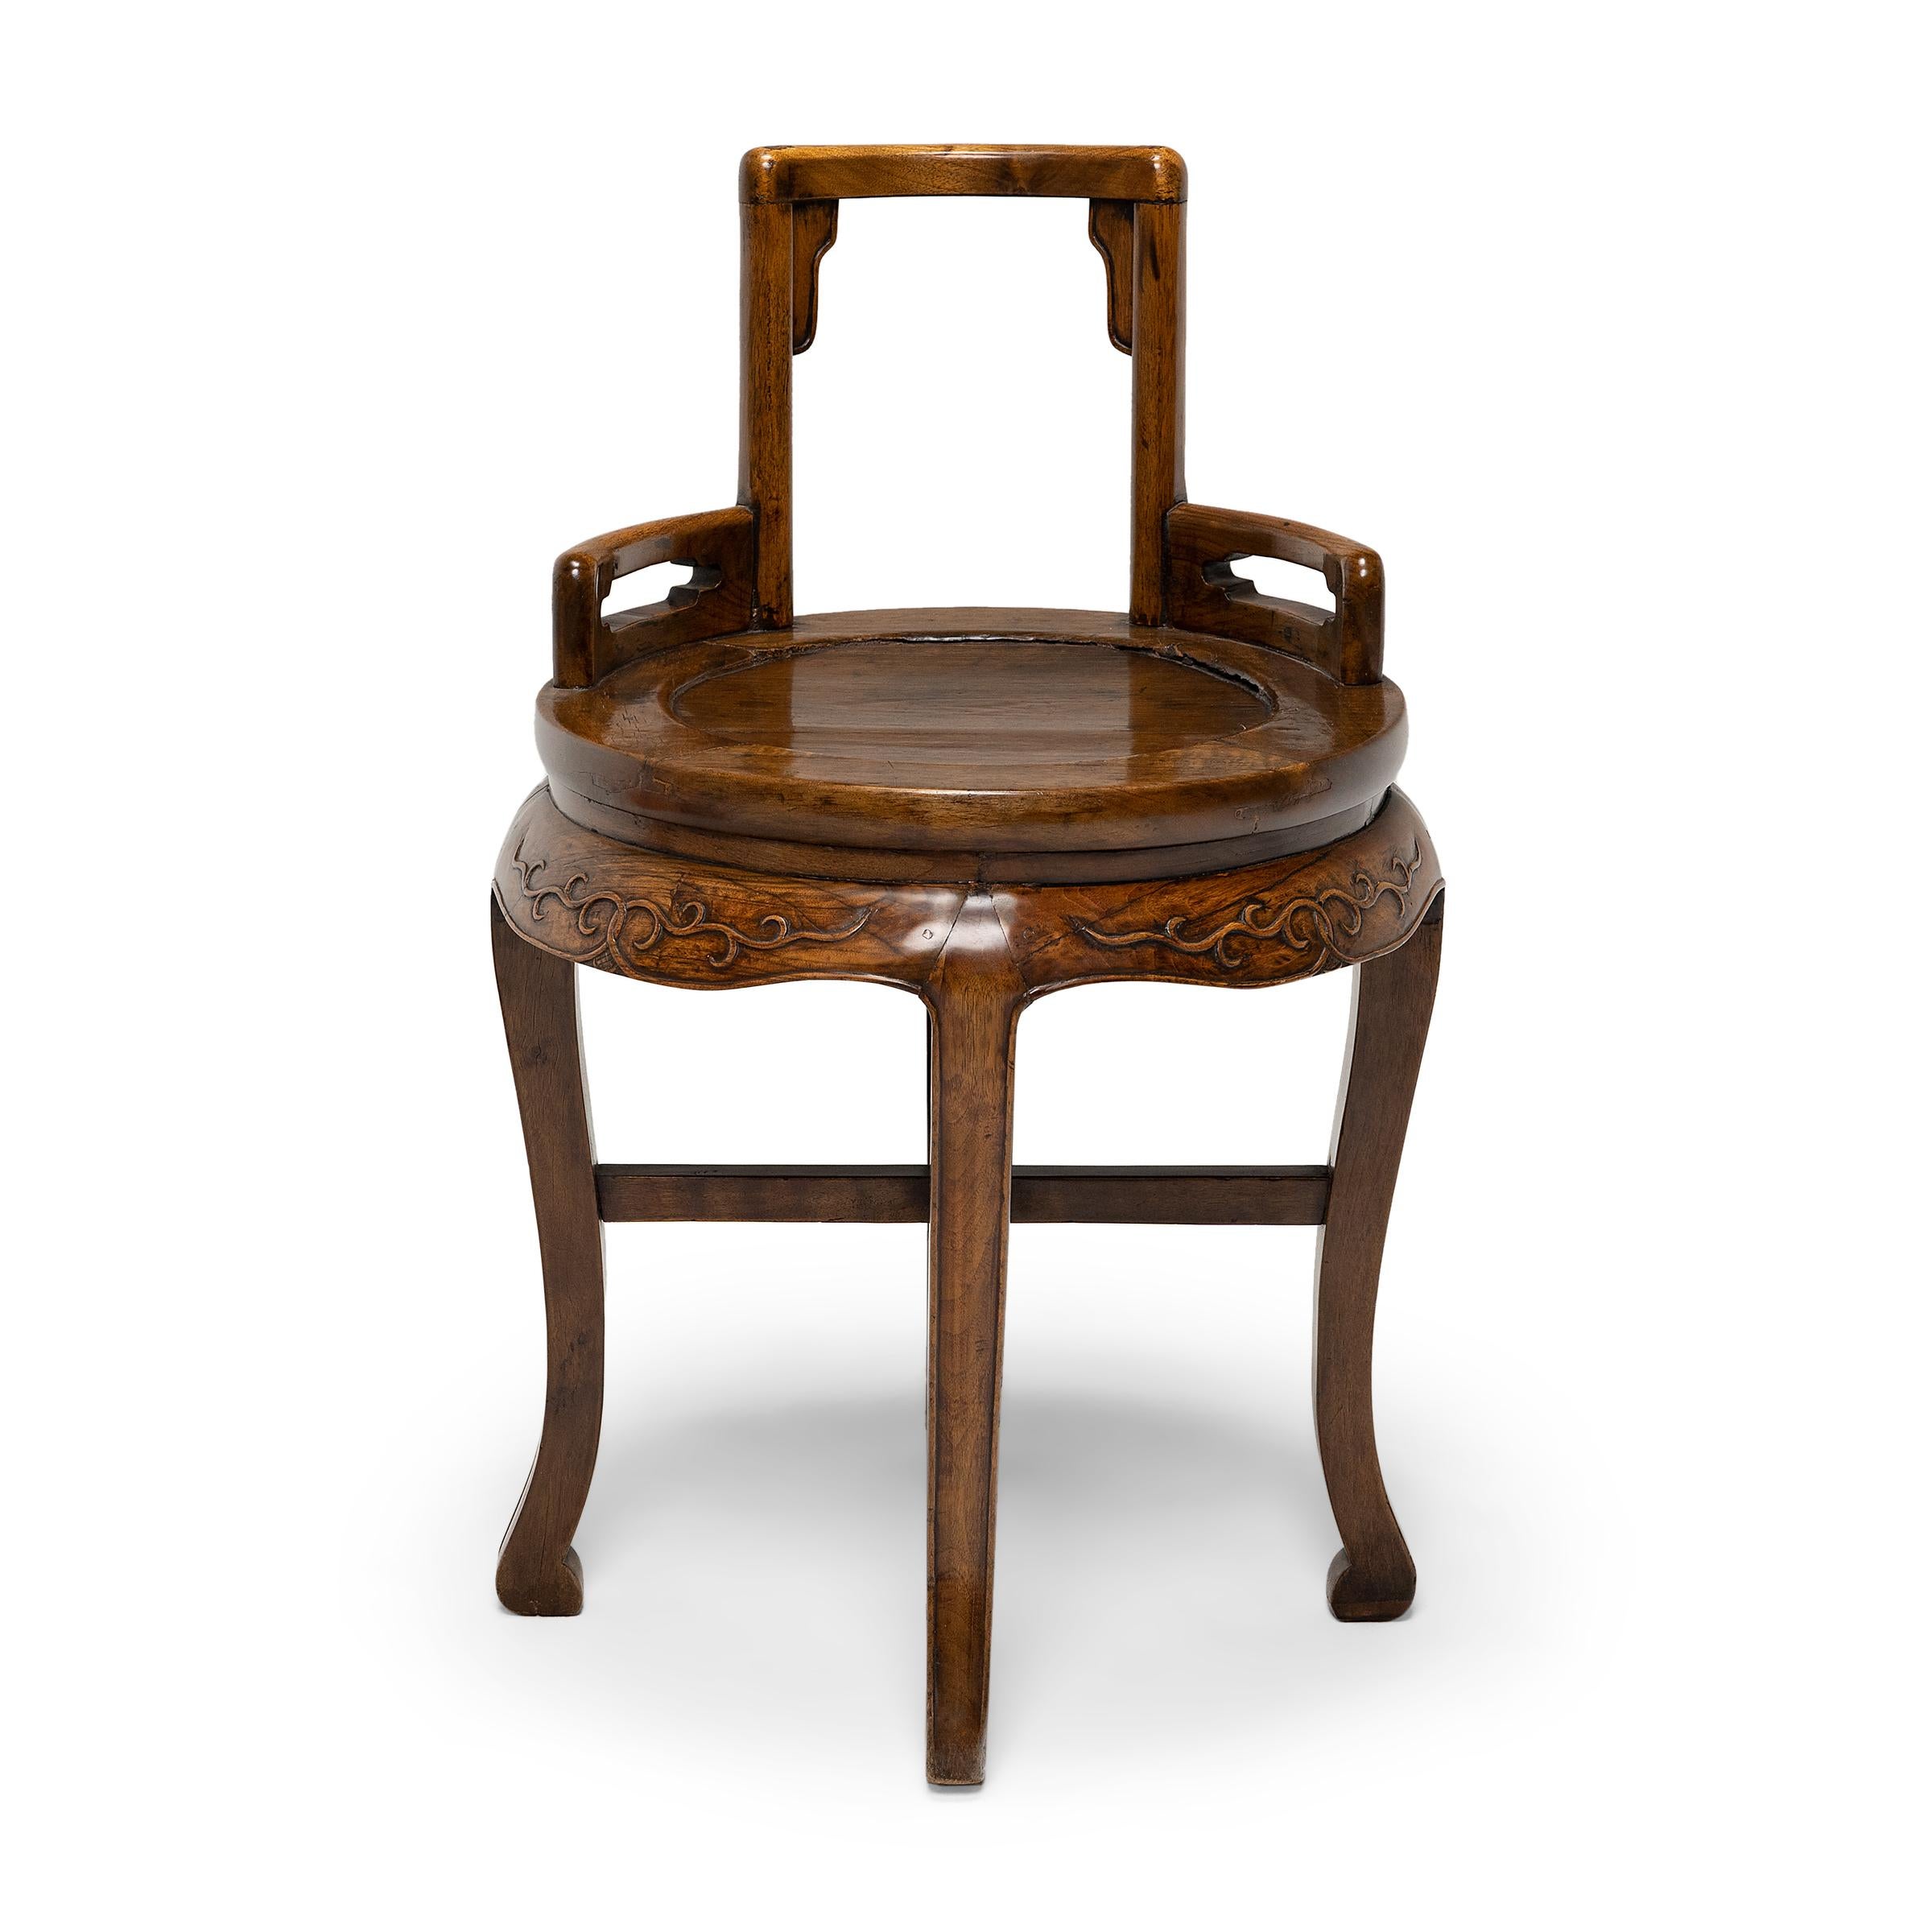 Dated to the late 19th century, this petite ladies' chair combines the low, square back of traditional rose chairs with the round frame and cabriole legs of waisted display tables. The chair features an open back with shallow arms, curved to match